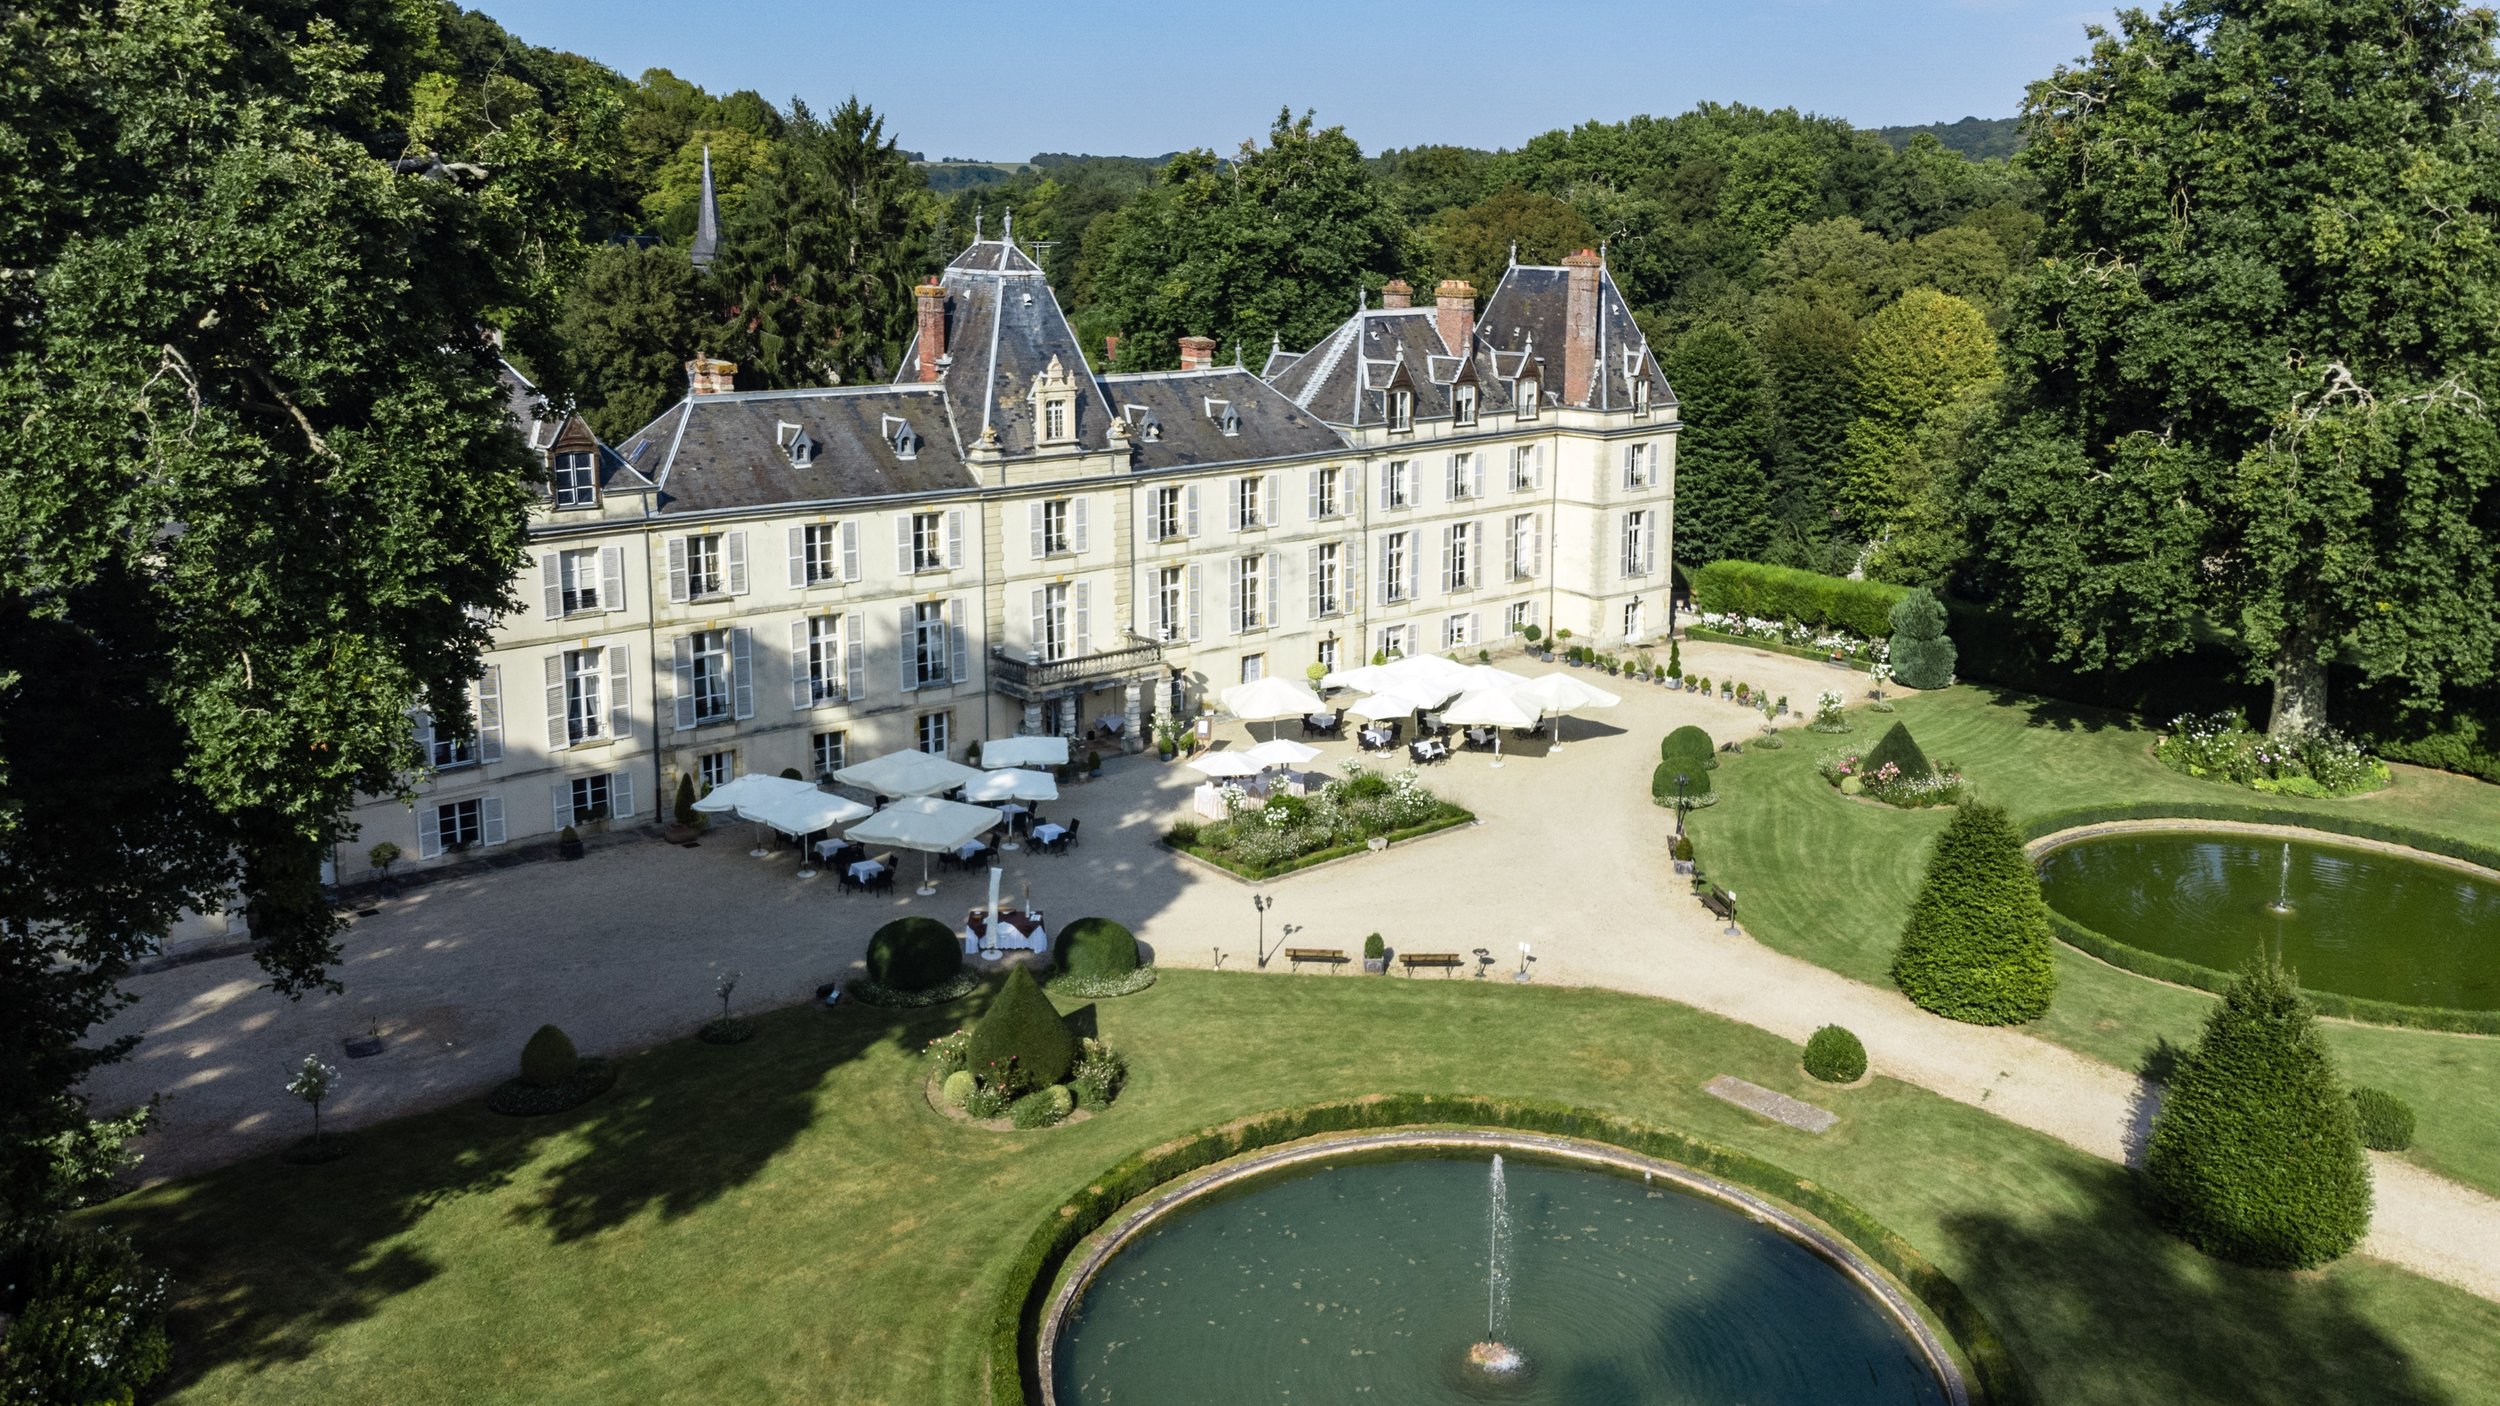 Drone shot of the exceptional château and English gardens